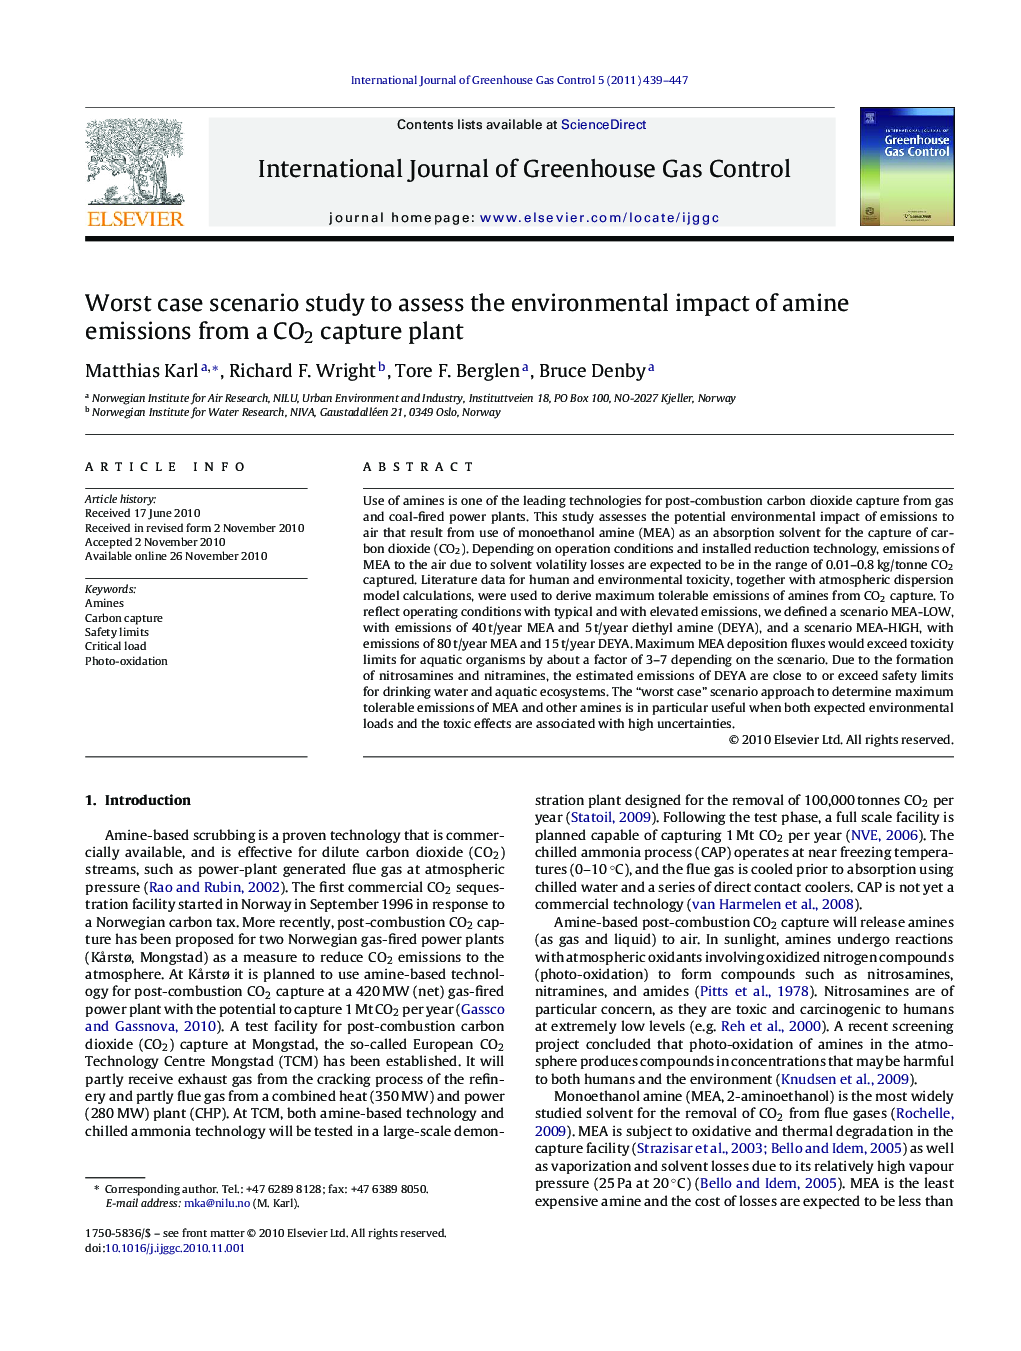 Worst case scenario study to assess the environmental impact of amine emissions from a CO2 capture plant